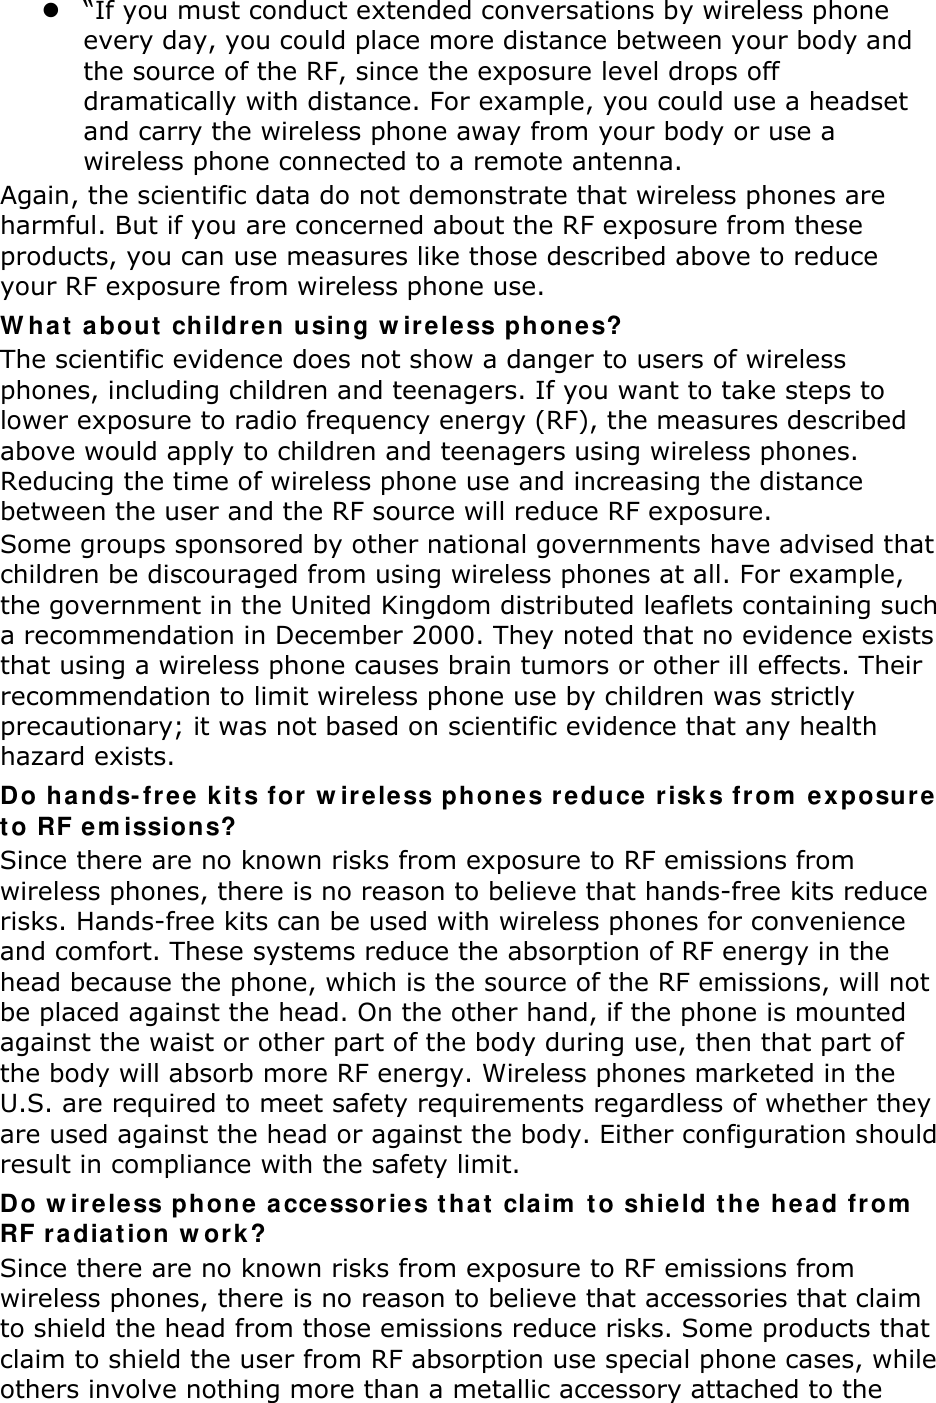  “If you must conduct extended conversations by wireless phone every day, you could place more distance between your body and the source of the RF, since the exposure level drops off dramatically with distance. For example, you could use a headset and carry the wireless phone away from your body or use a wireless phone connected to a remote antenna. Again, the scientific data do not demonstrate that wireless phones are harmful. But if you are concerned about the RF exposure from these products, you can use measures like those described above to reduce your RF exposure from wireless phone use. W hat  a bout  childre n using w ir eless ph ones? The scientific evidence does not show a danger to users of wireless phones, including children and teenagers. If you want to take steps to lower exposure to radio frequency energy (RF), the measures described above would apply to children and teenagers using wireless phones. Reducing the time of wireless phone use and increasing the distance between the user and the RF source will reduce RF exposure. Some groups sponsored by other national governments have advised that children be discouraged from using wireless phones at all. For example, the government in the United Kingdom distributed leaflets containing such a recommendation in December 2000. They noted that no evidence exists that using a wireless phone causes brain tumors or other ill effects. Their recommendation to limit wireless phone use by children was strictly precautionary; it was not based on scientific evidence that any health hazard exists.   Do hands-free k it s for  w ir eless phones r educe r isk s from  exposure  t o RF em issions? Since there are no known risks from exposure to RF emissions from wireless phones, there is no reason to believe that hands-free kits reduce risks. Hands-free kits can be used with wireless phones for convenience and comfort. These systems reduce the absorption of RF energy in the head because the phone, which is the source of the RF emissions, will not be placed against the head. On the other hand, if the phone is mounted against the waist or other part of the body during use, then that part of the body will absorb more RF energy. Wireless phones marketed in the U.S. are required to meet safety requirements regardless of whether they are used against the head or against the body. Either configuration should result in compliance with the safety limit. Do w ir eless phone accessor ie s t ha t  cla im  t o sh ie ld t h e he ad fr om  RF r adia t ion w or k? Since there are no known risks from exposure to RF emissions from wireless phones, there is no reason to believe that accessories that claim to shield the head from those emissions reduce risks. Some products that claim to shield the user from RF absorption use special phone cases, while others involve nothing more than a metallic accessory attached to the 